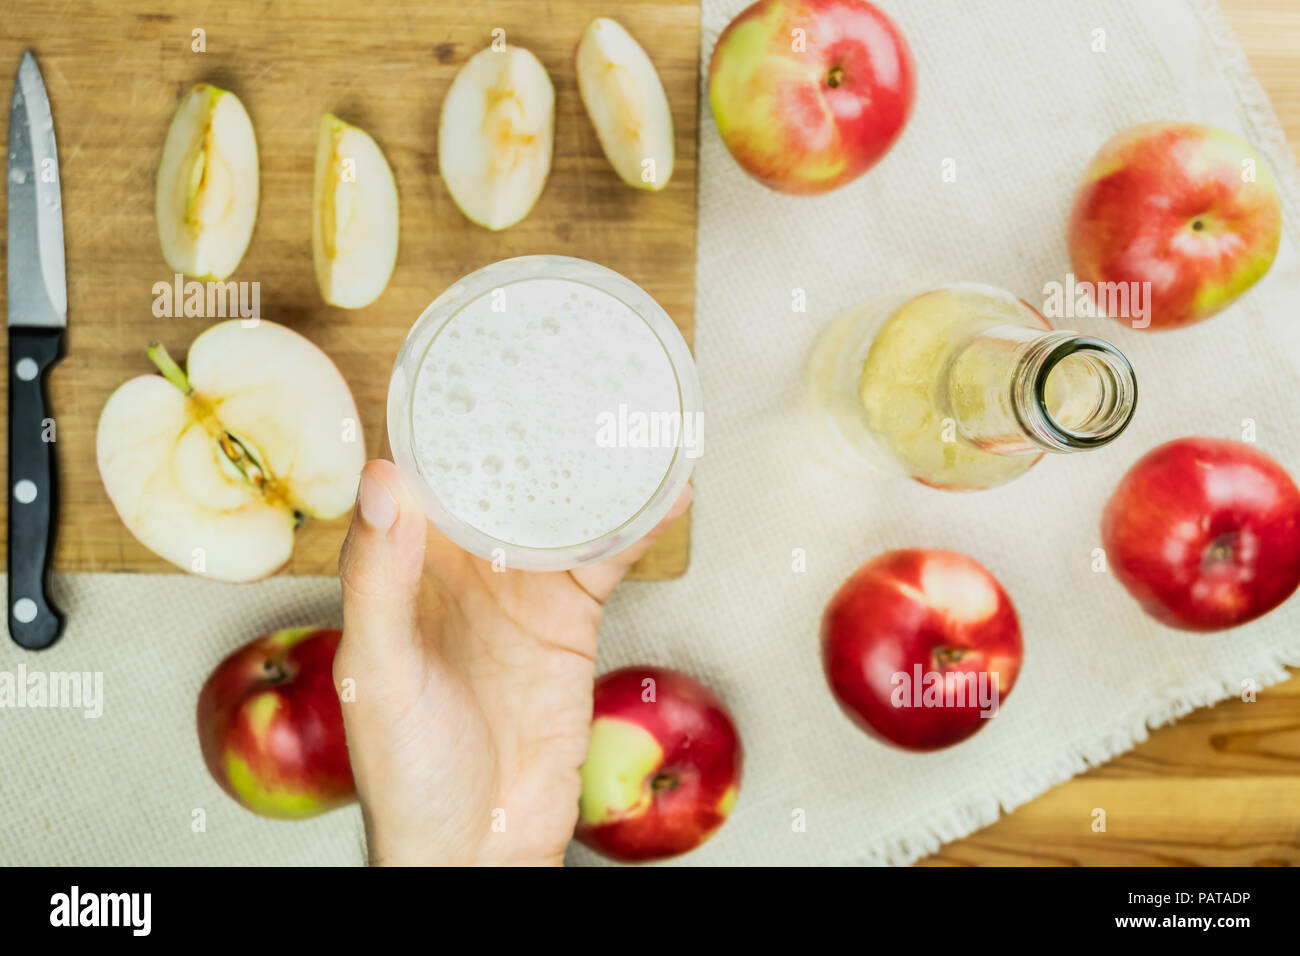 Flat lay with glass of sparkling cidre drink on rustic wooden table. Point of view of hand holding glass of home made cider and locally grown organic  Stock Photo